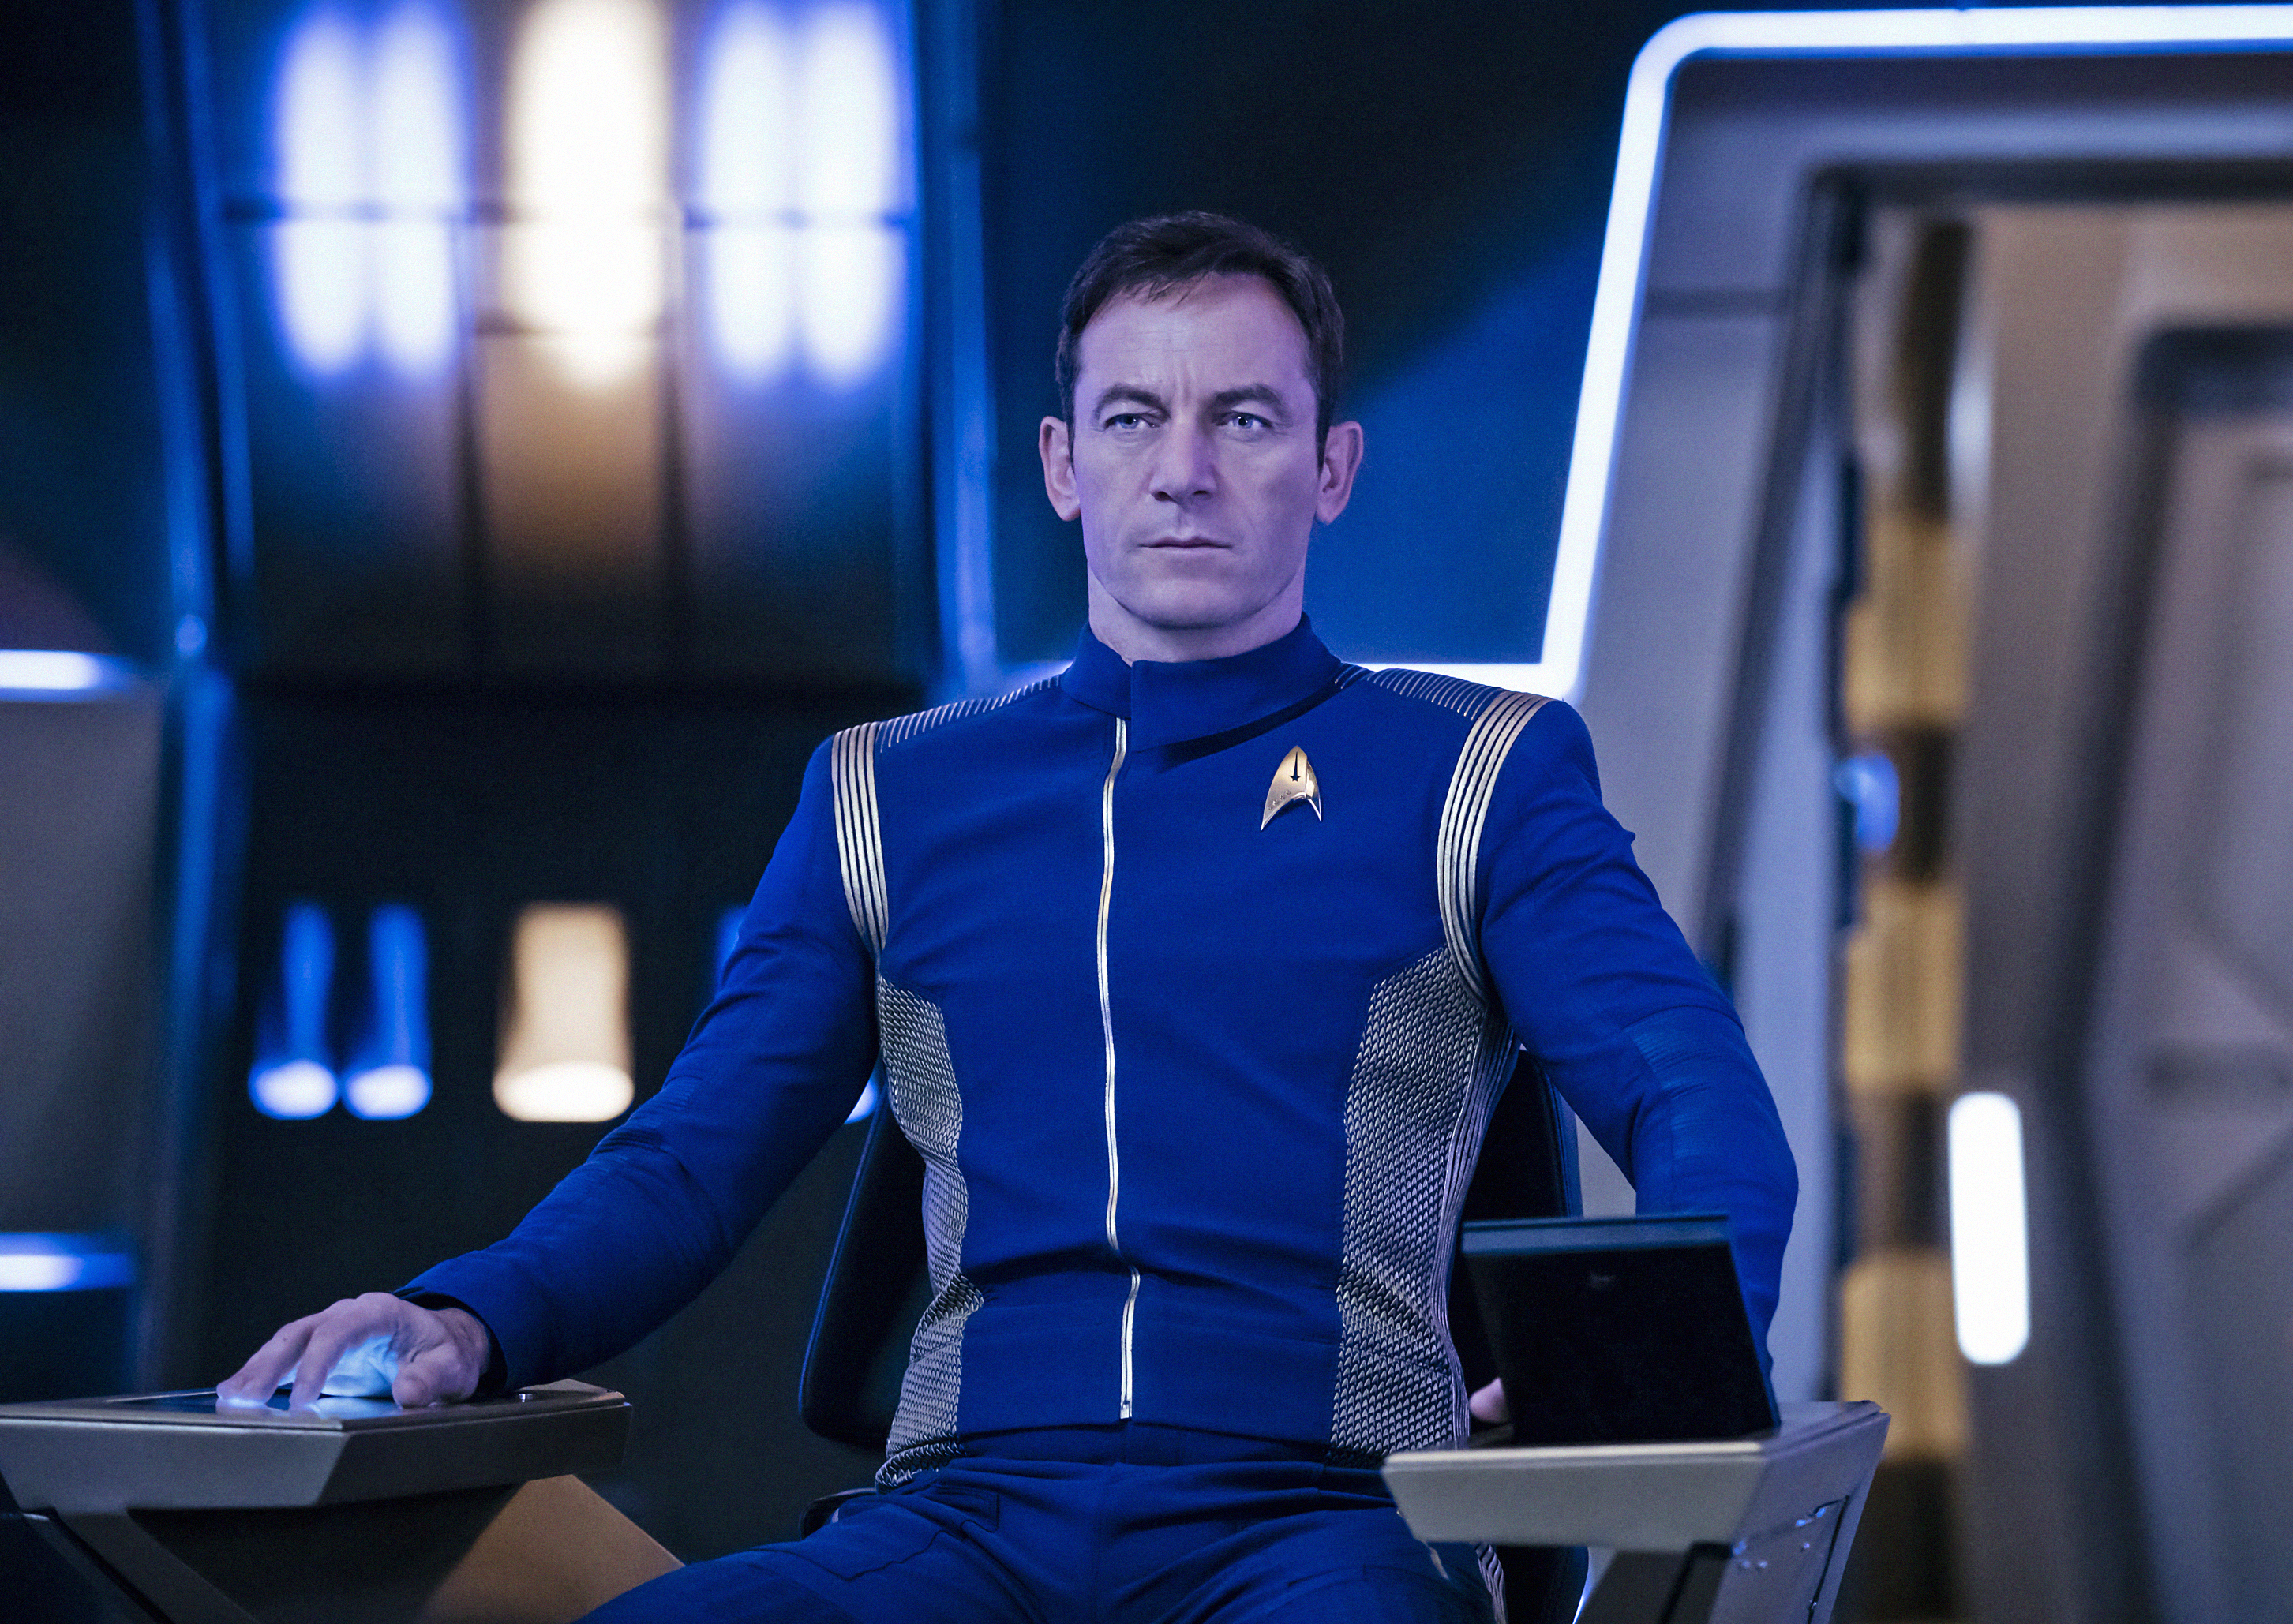 Pictured: Jason Isaacs as Captain Gabriel Lorca. STAR TREK: DISCOVERY coming to CBS All Access.  Photo Cr: Jan Thijs  ï¿½ 2017 CBS Interactive. All Rights Reserved.